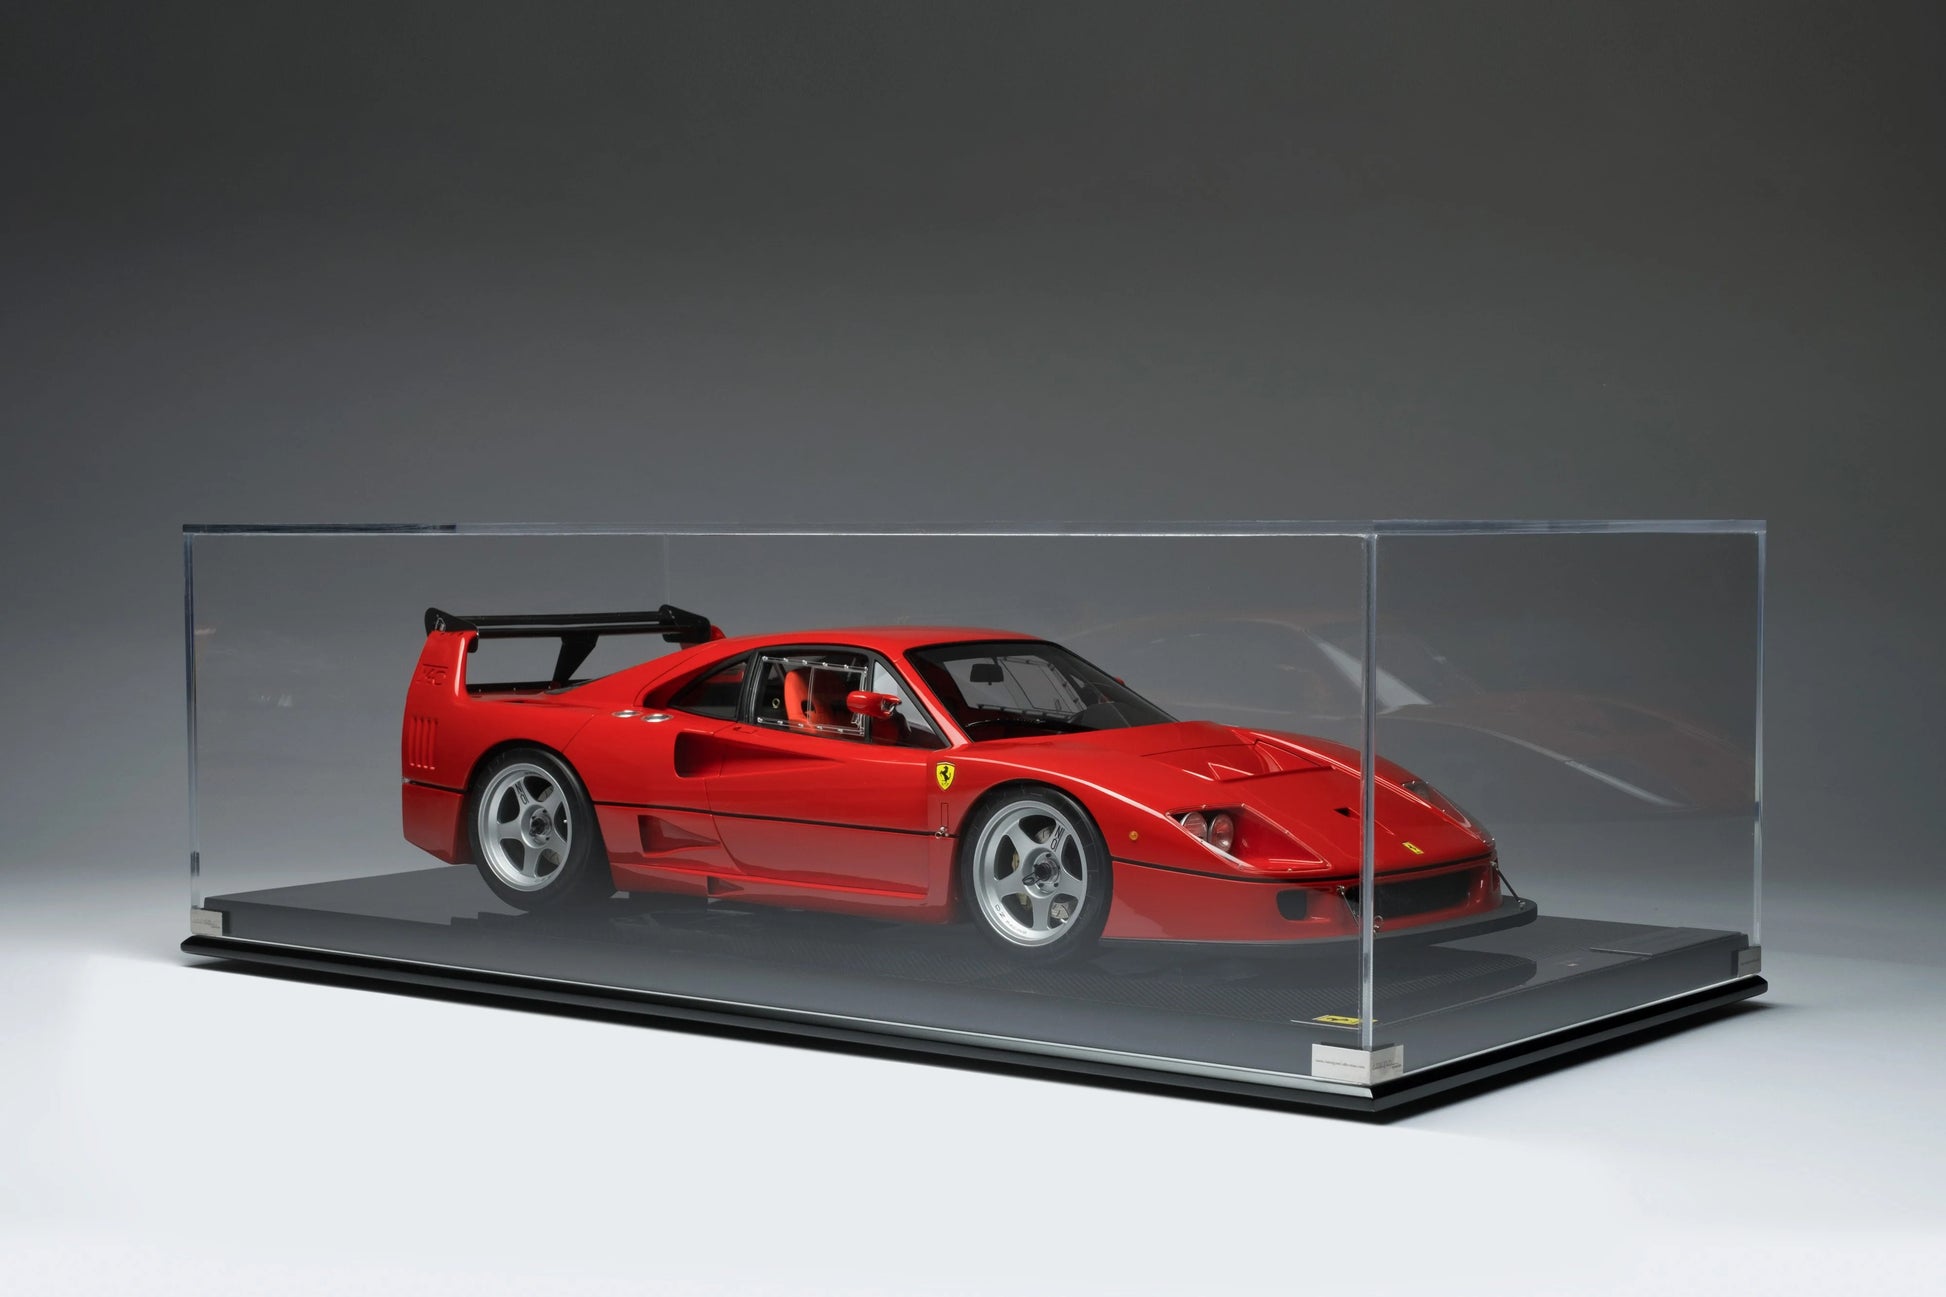 Amalgam Collection Ferrari F40 Competizione 1:8 Model Car | Exquisite Large-Scale Replica, Highly Detailed Collector's Item | Explore a Range of Luxury Collectibles at 2Jour Concierge, #1 luxury high-end gift & lifestyle shop